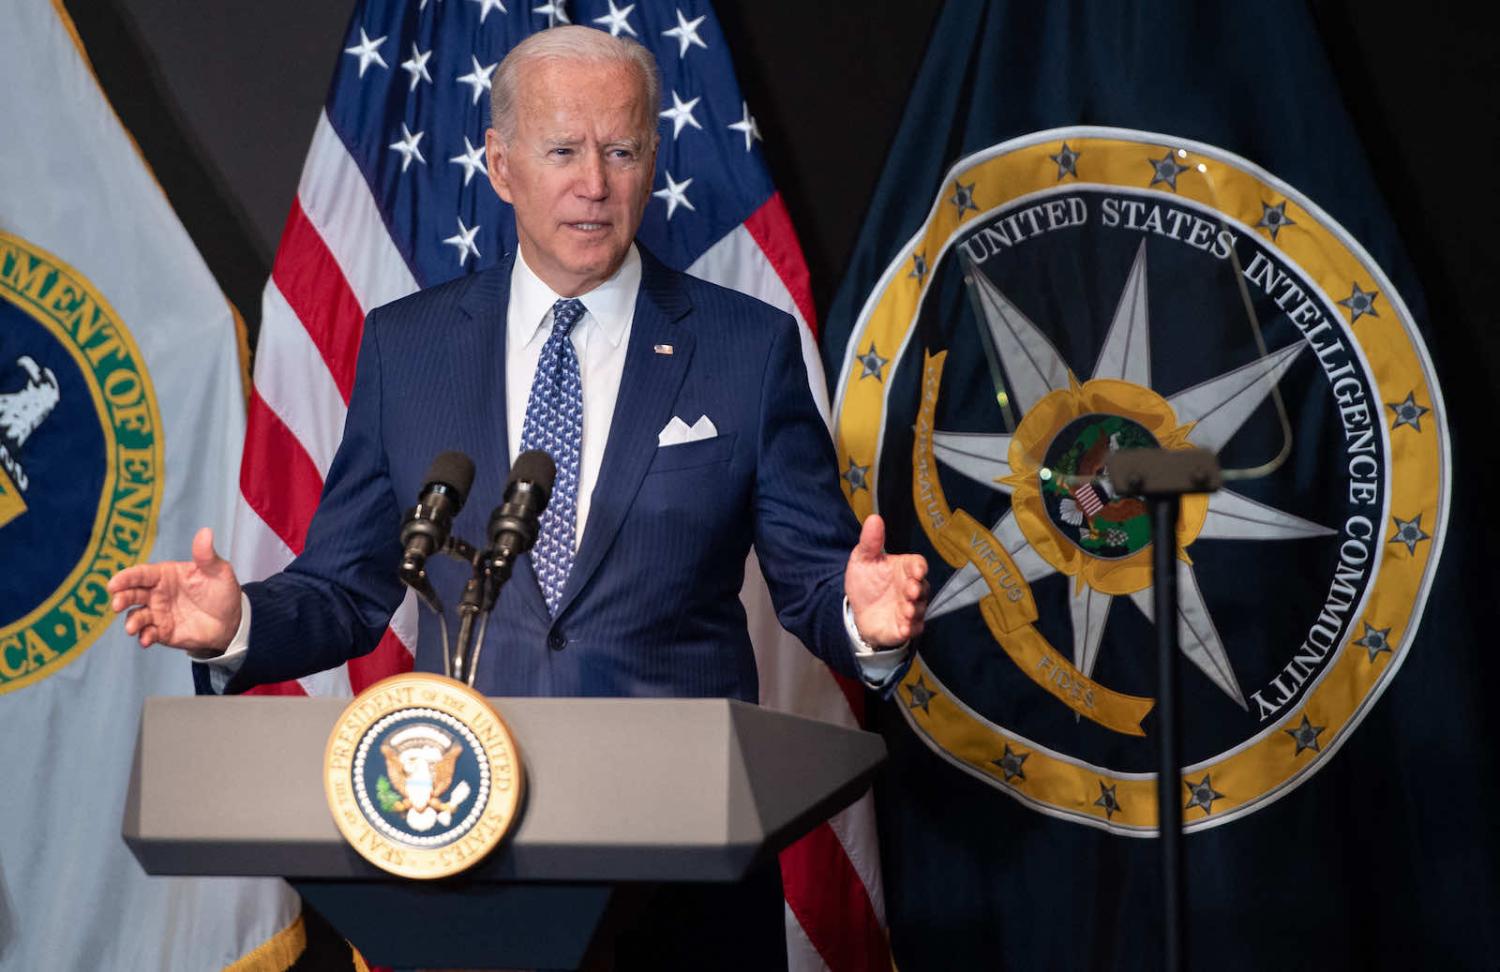 US President Joe Biden addresses the Intelligence Community workforce on a tour at the Office of the Director of National Intelligence, Virginia, 27 July (Saul Loeb/AFP via Getty Images)